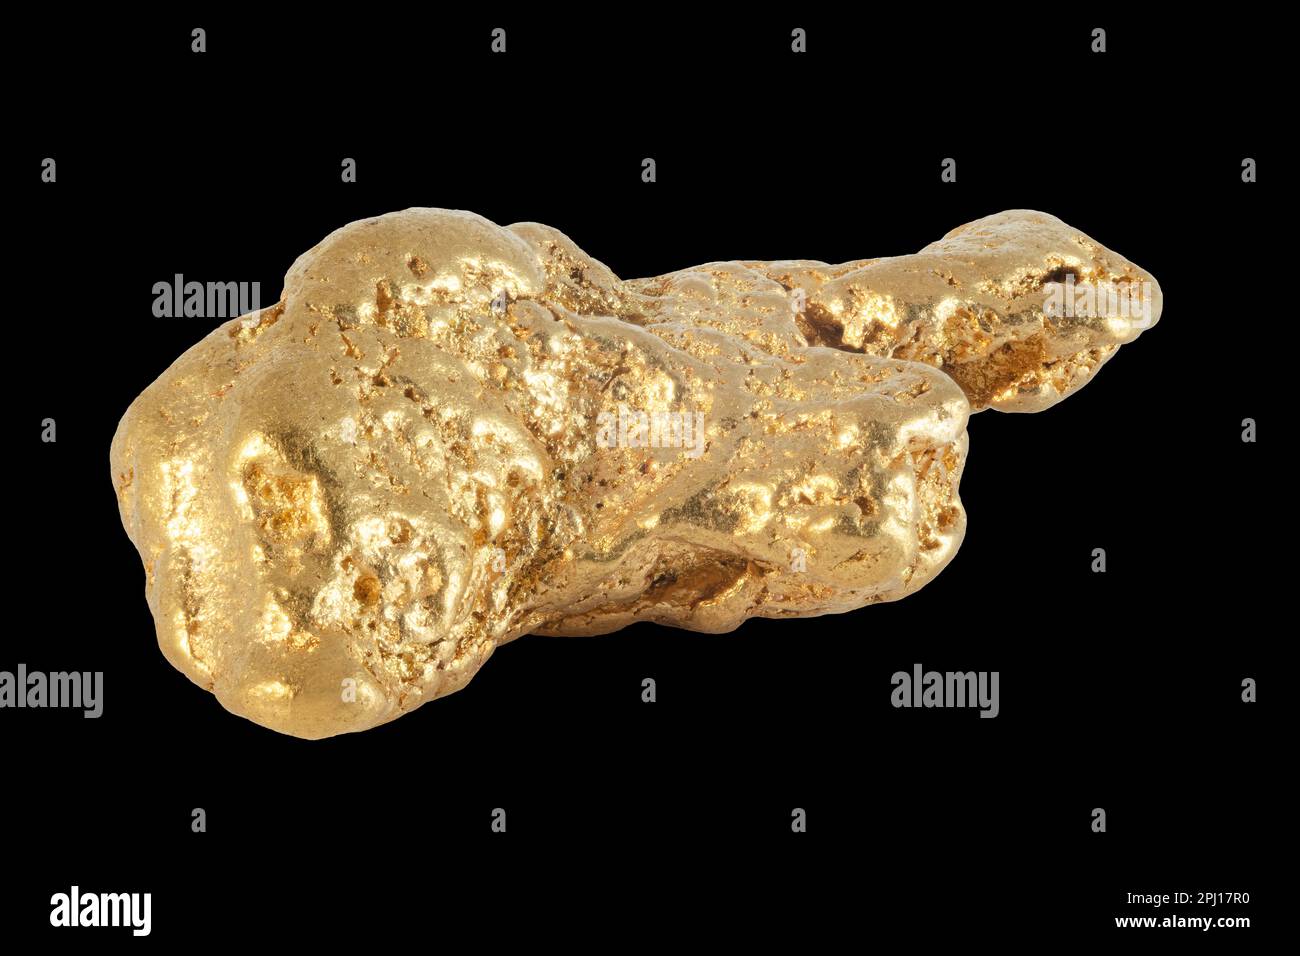 Gold nugget, from Carisbrook Australia, on solid black background. Stock Photo